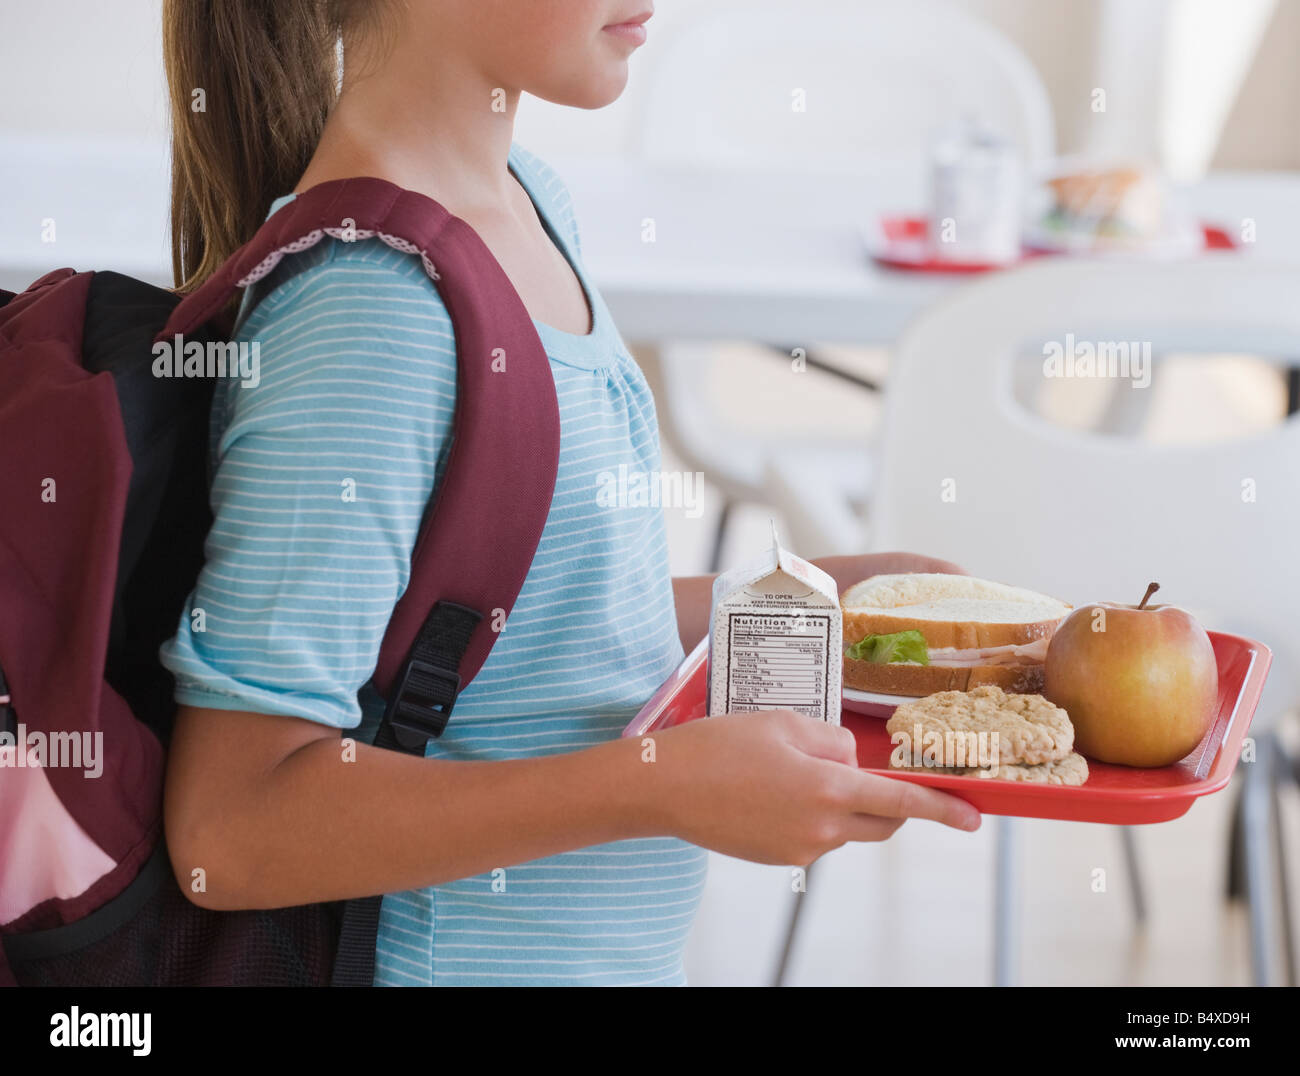 Girl carrying lunch tray at school Stock Photo